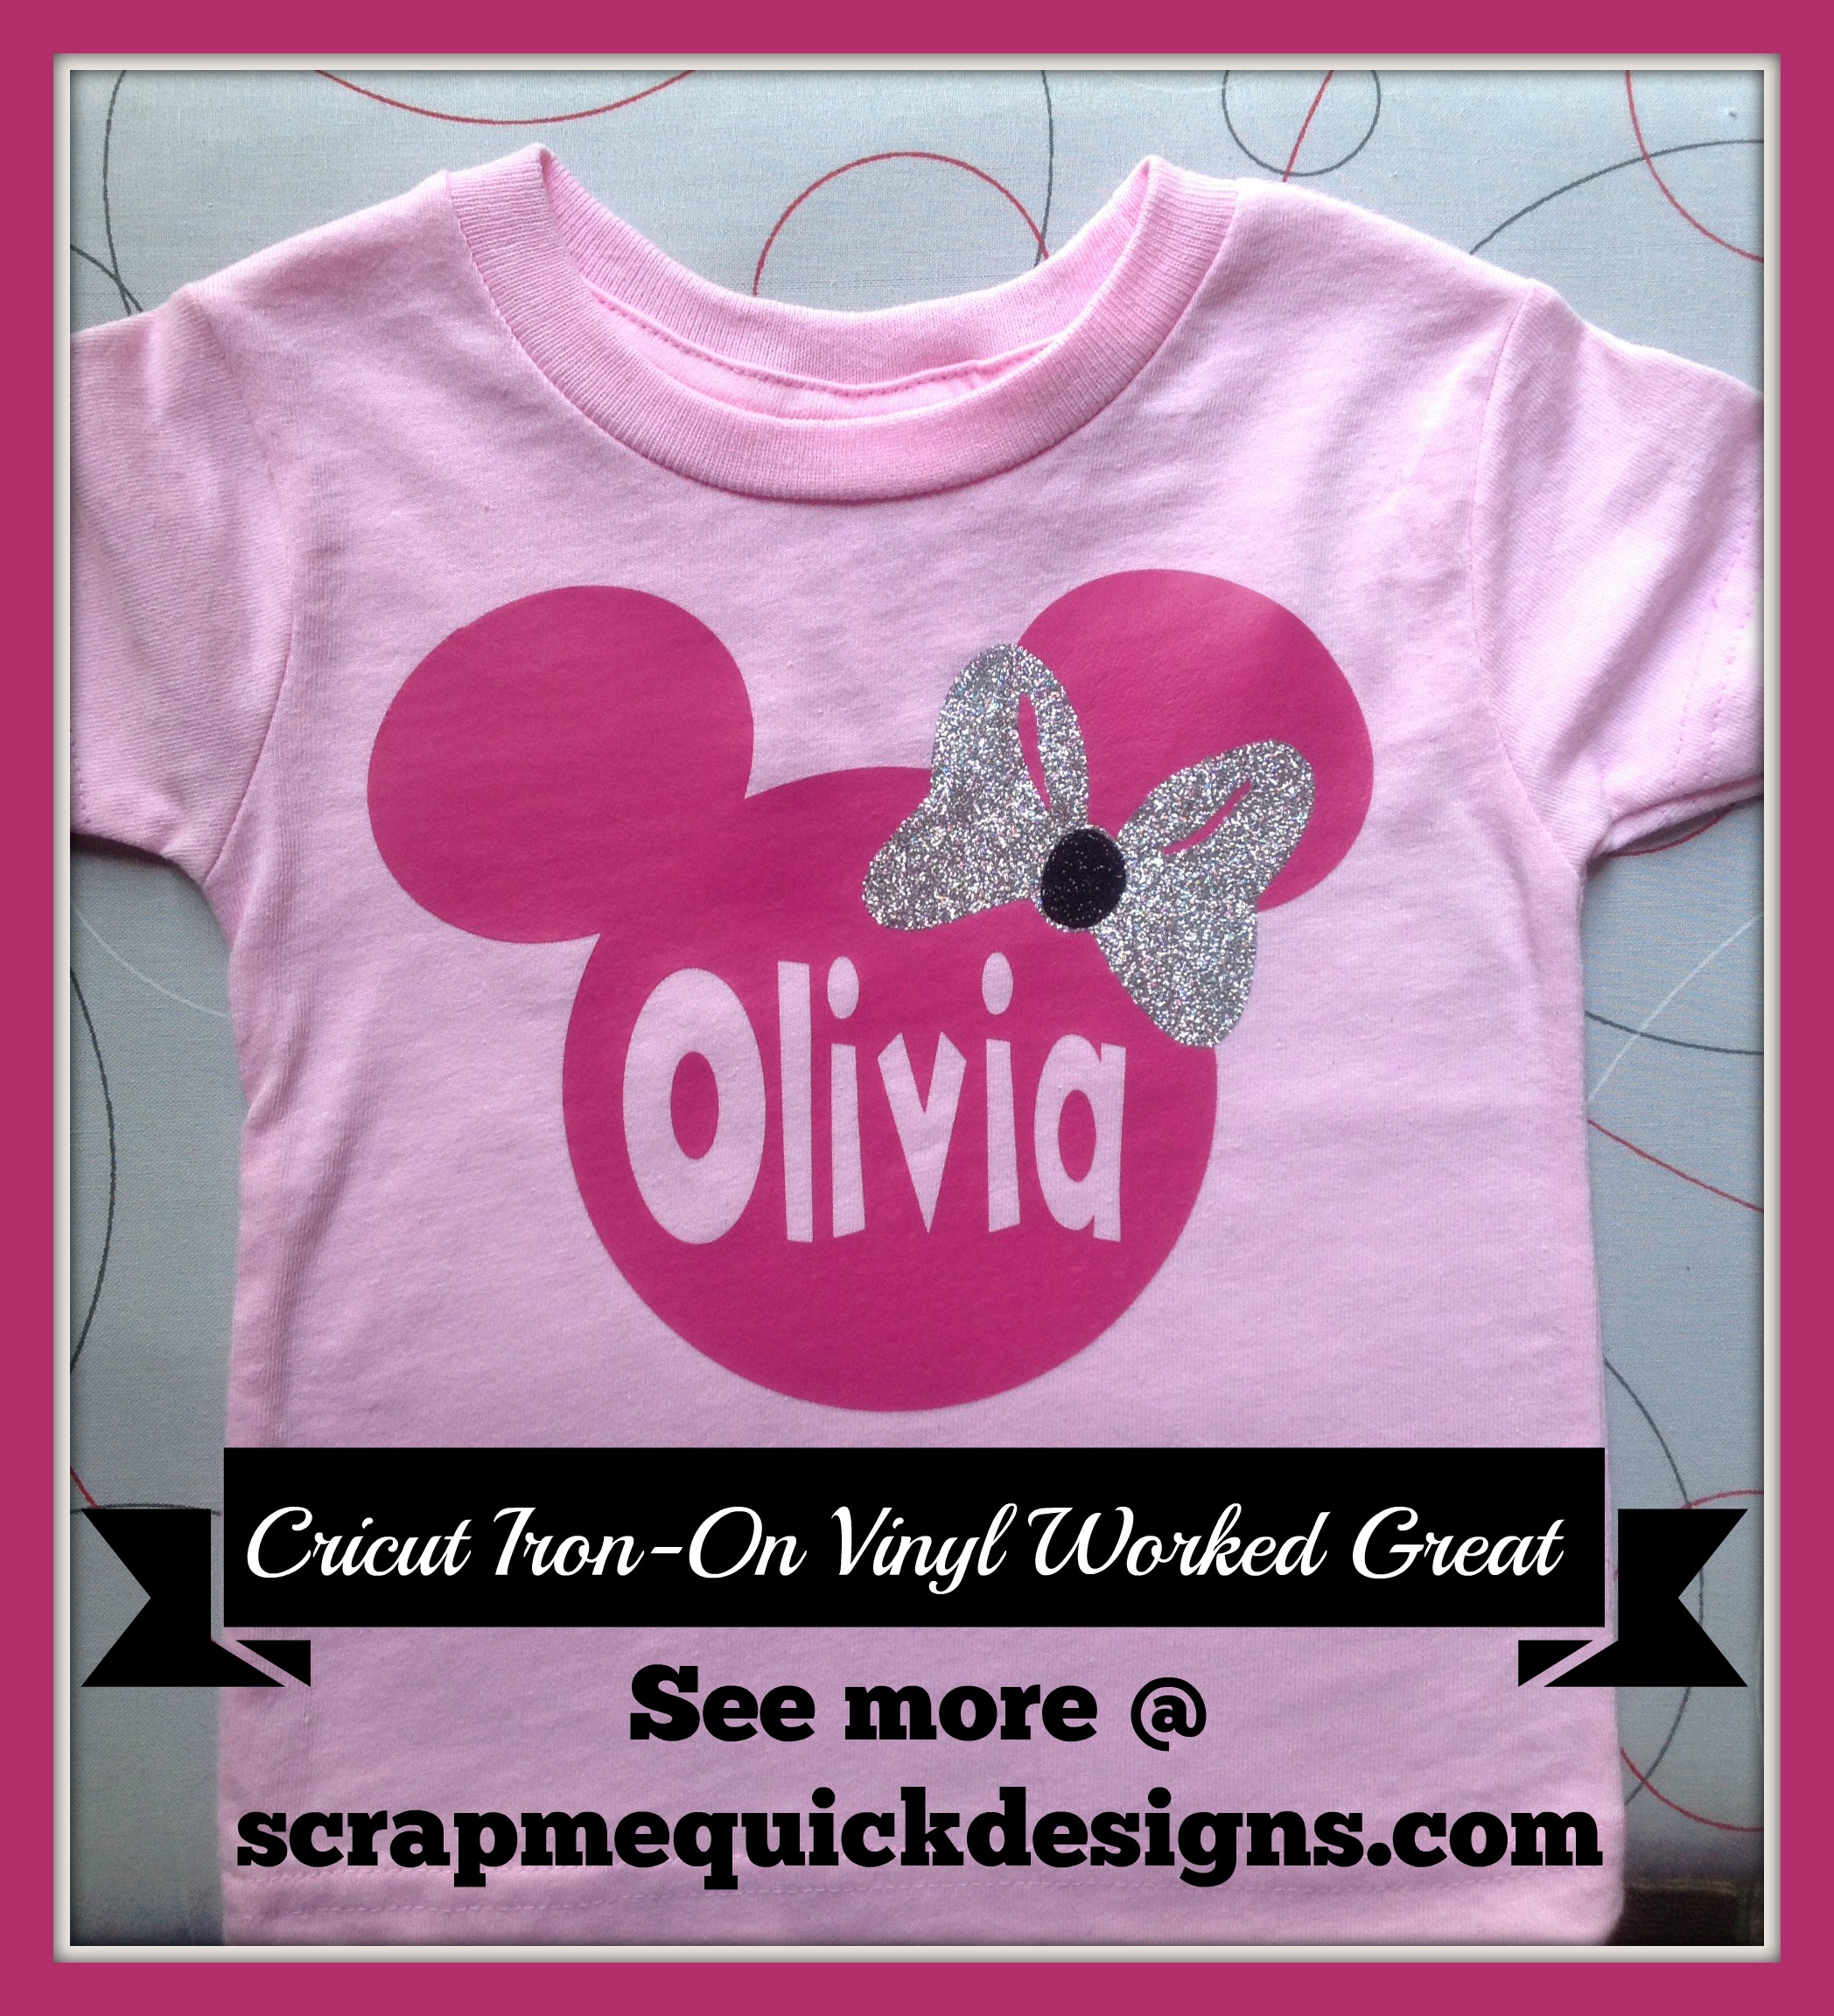 Cricut Printable Vinyl Iron On If You Are Looking For Information On Printable Waterproof